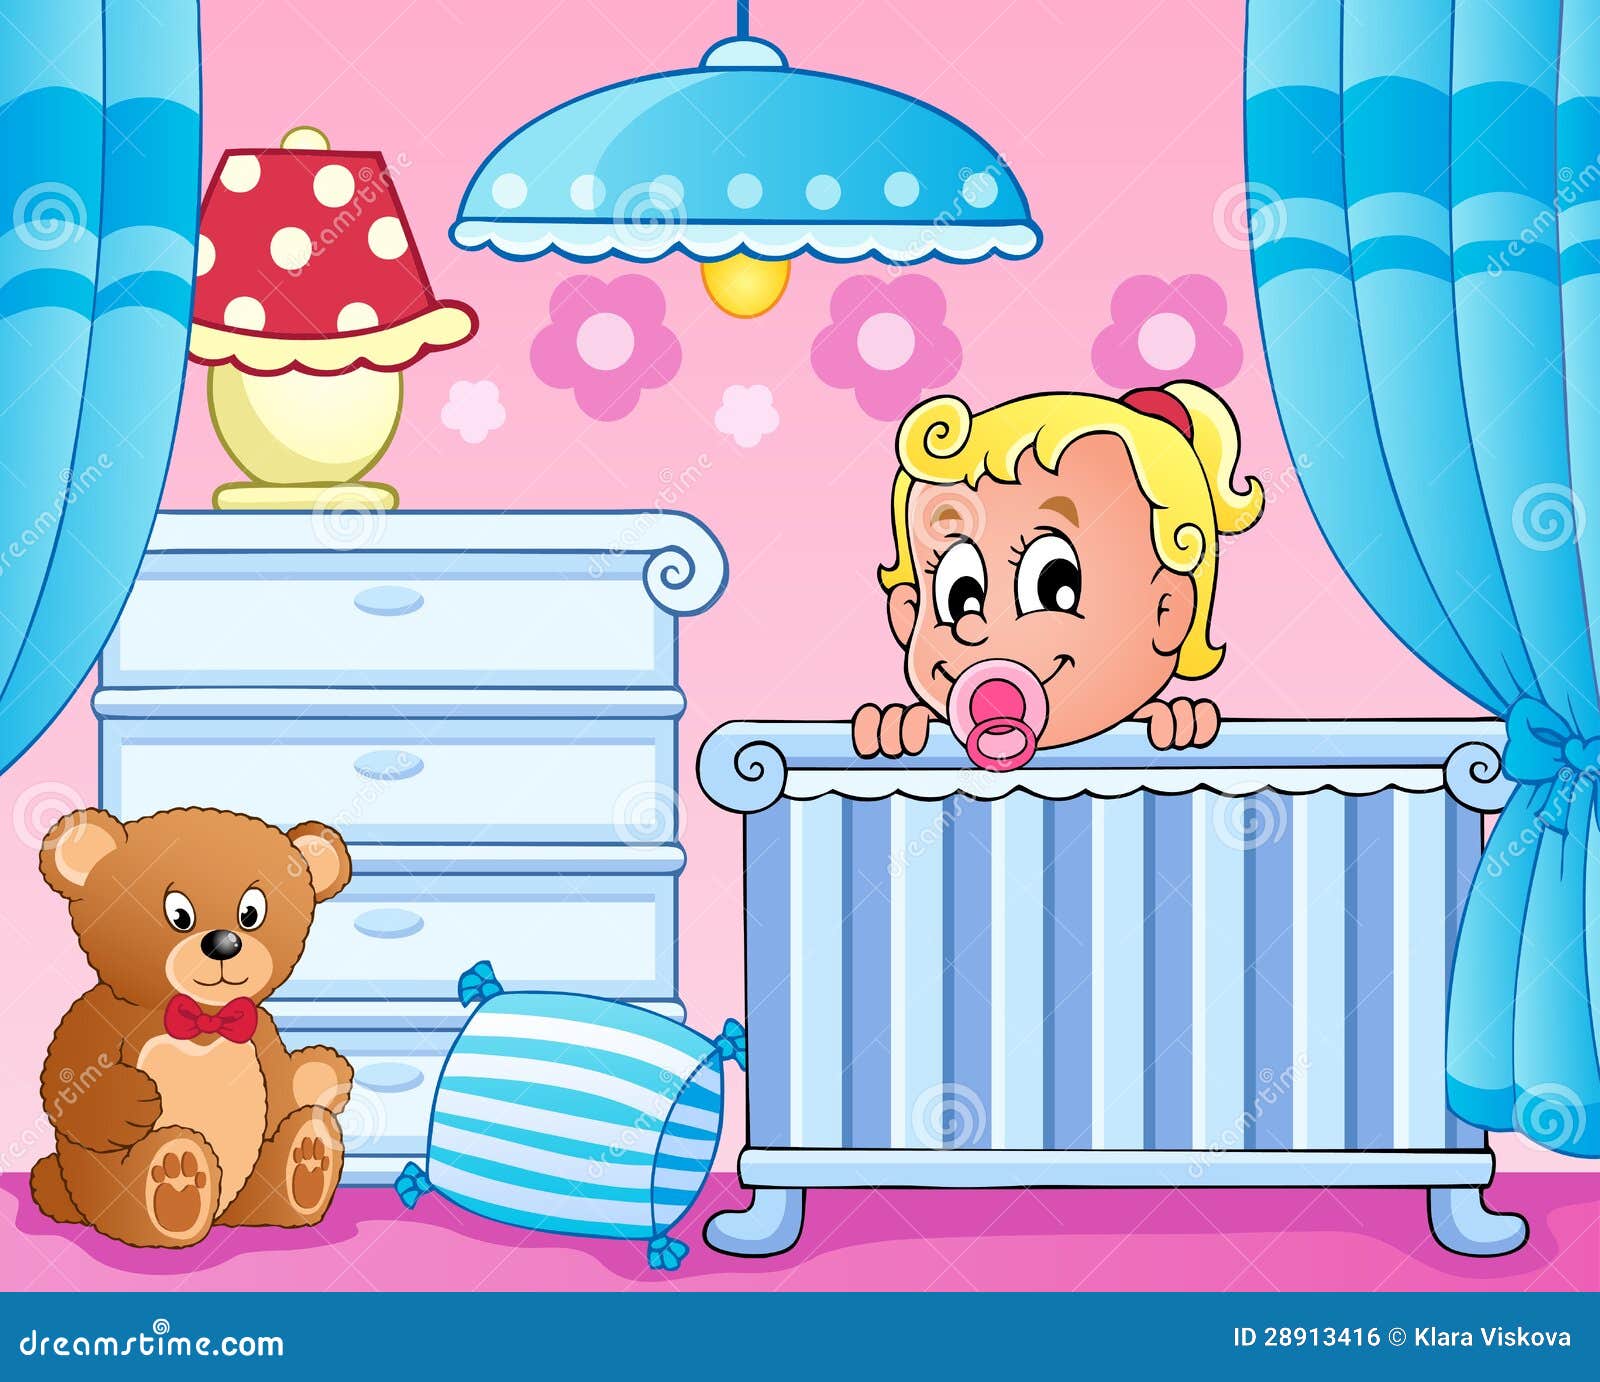 Baby room theme image 1 stock vector. Illustration of smiling - 28913416